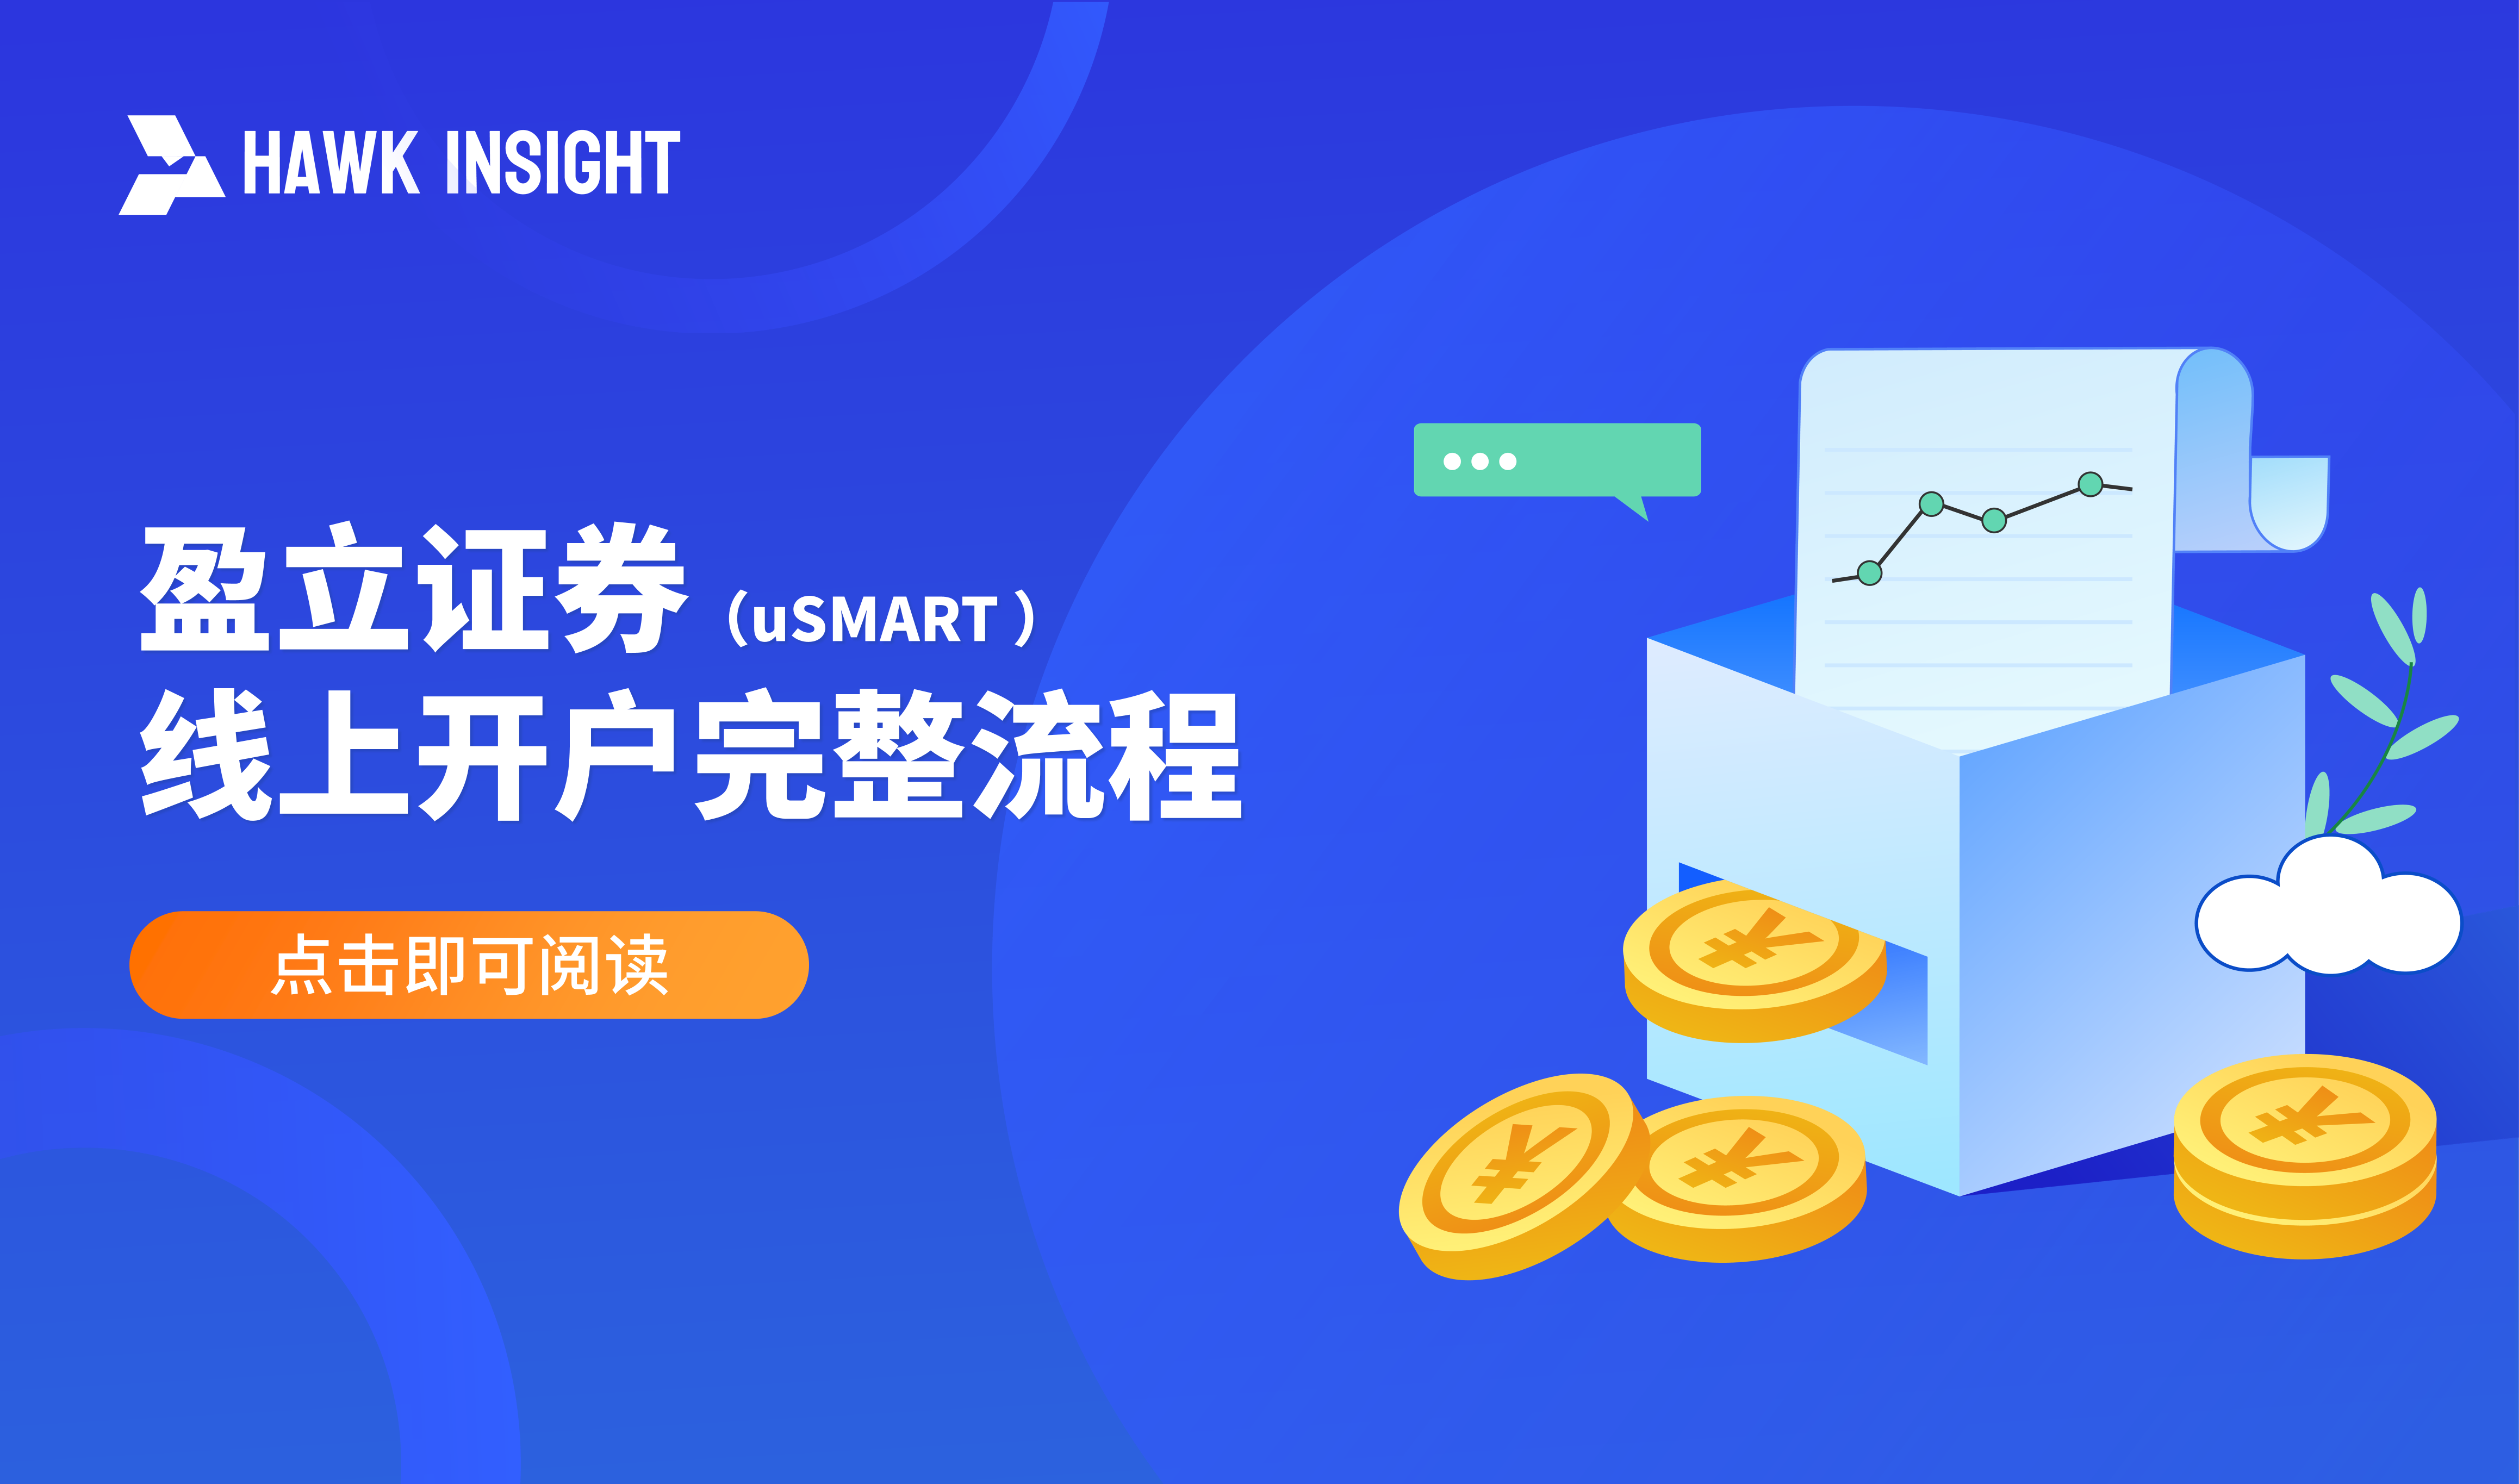 Yingli Securities (uSMART) online account opening complete process